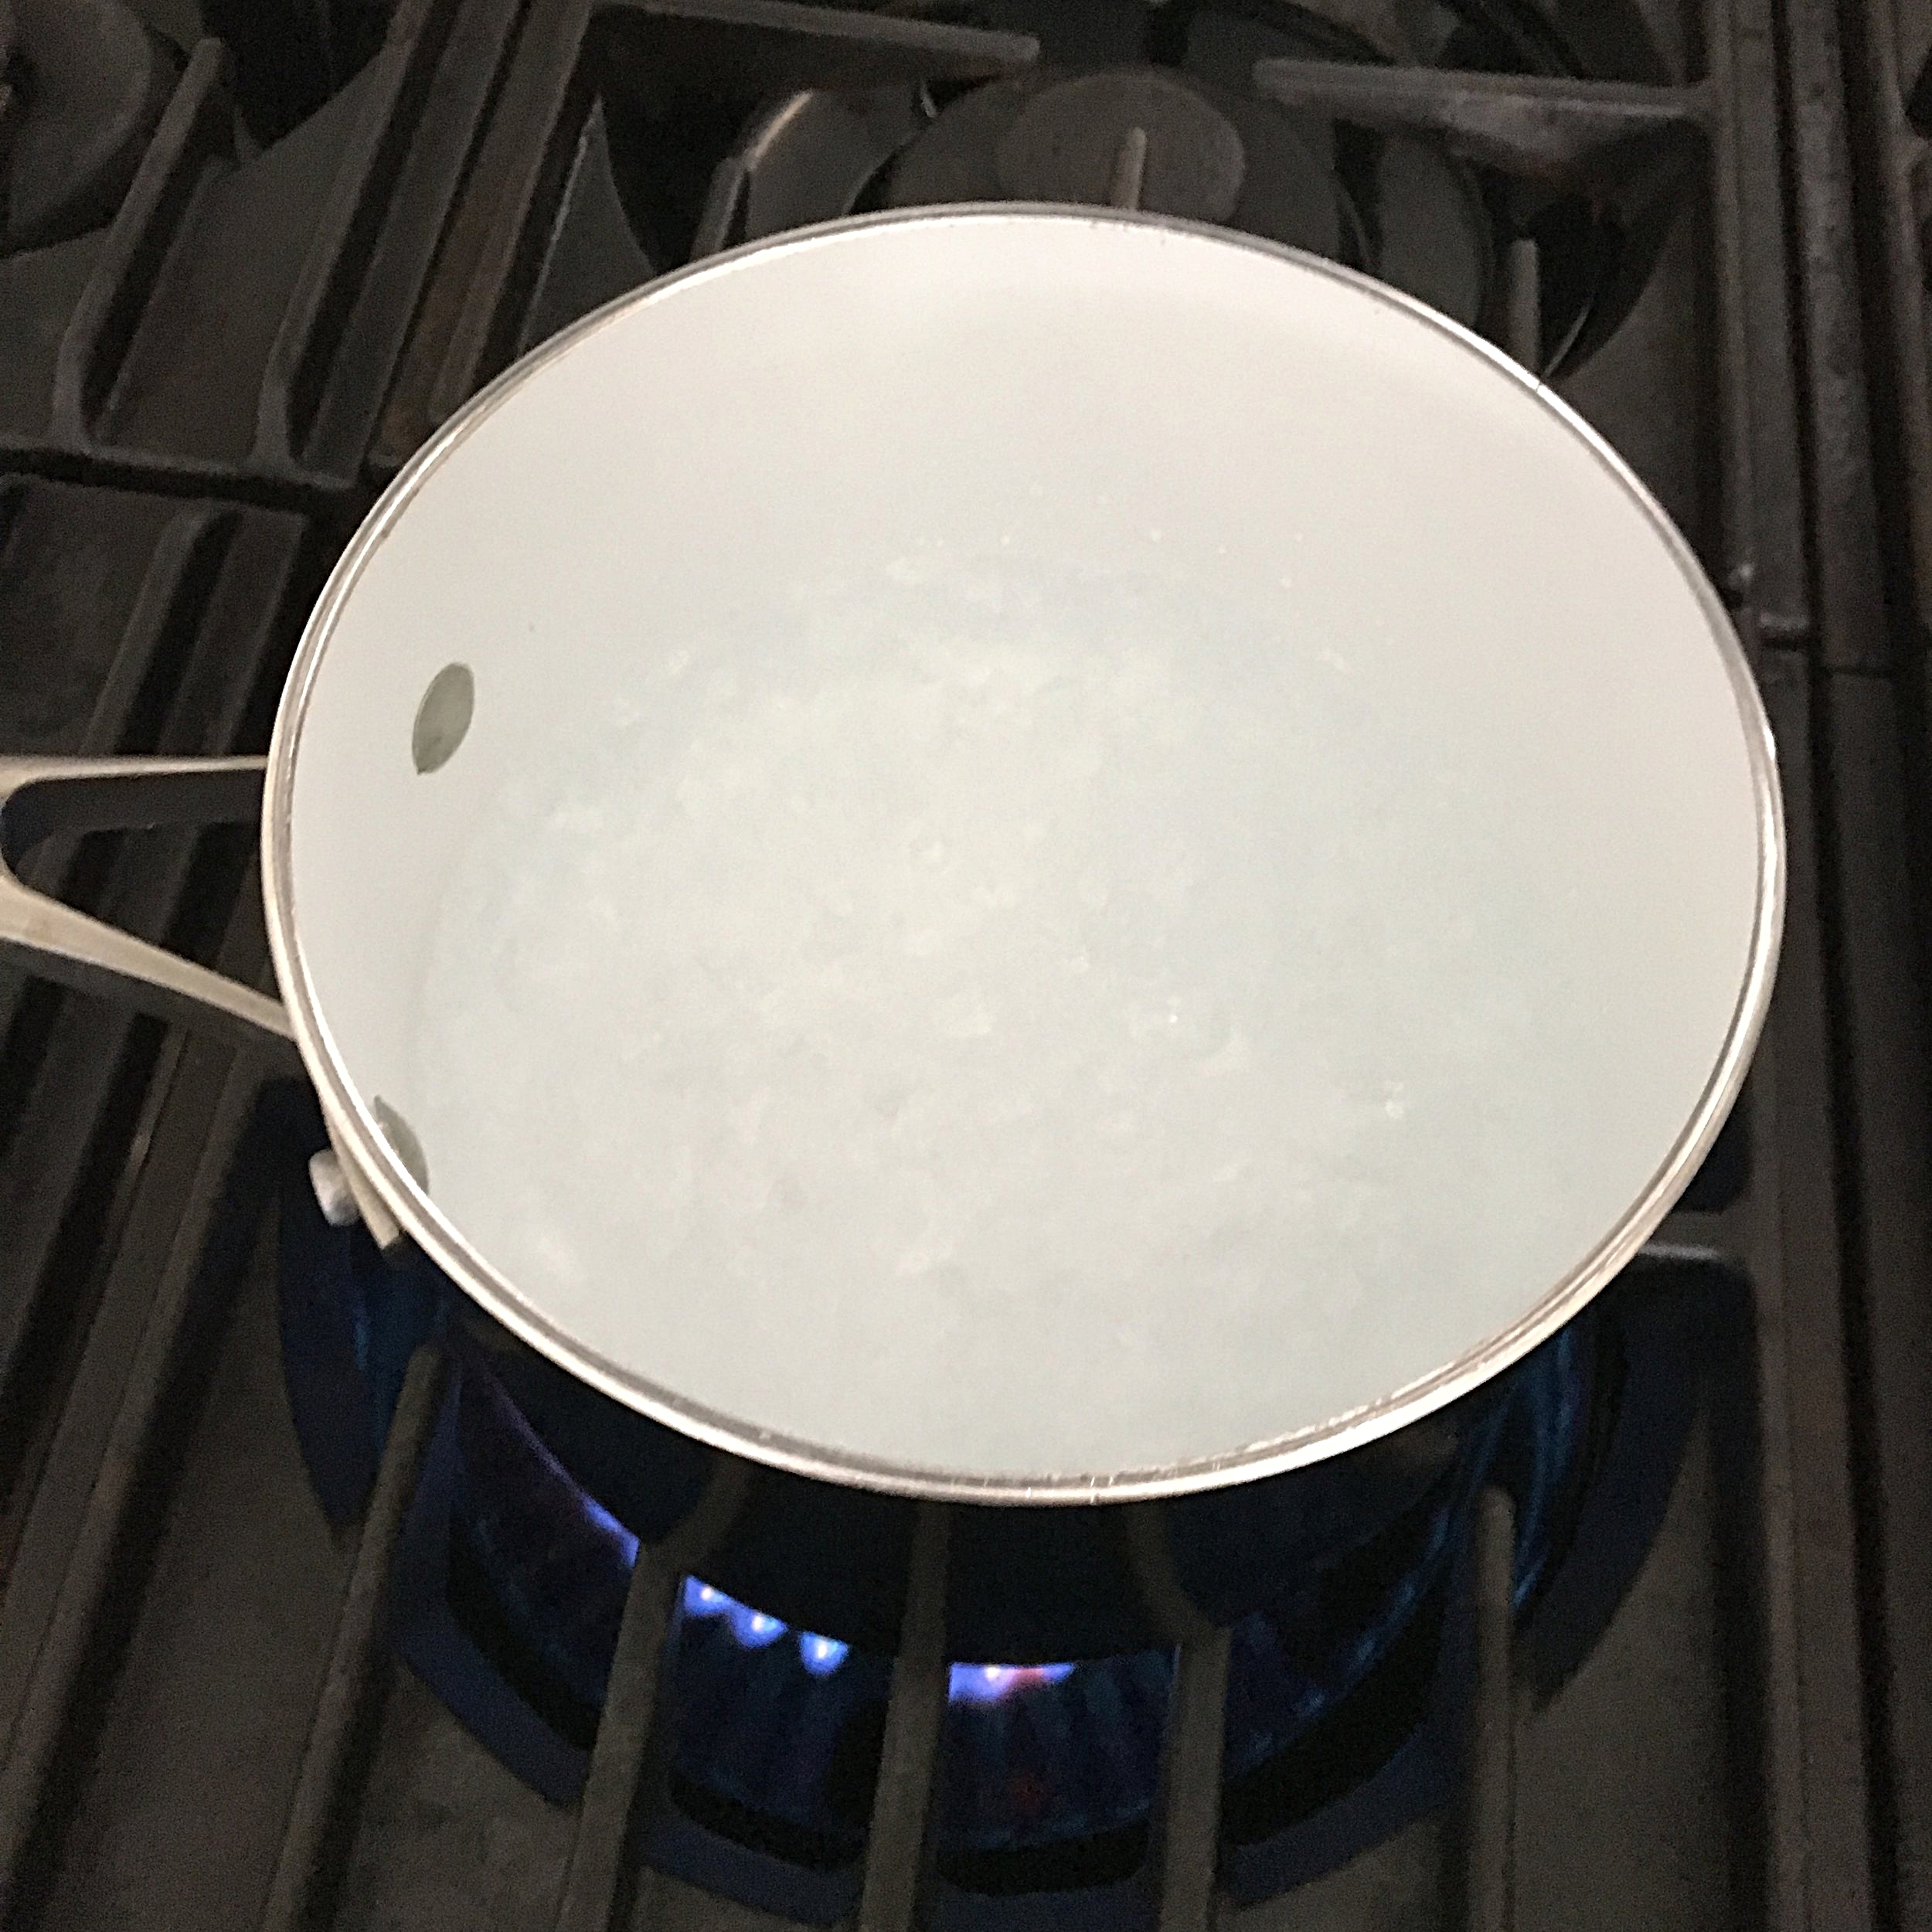 Step 1: Bring a pot of water to a boil